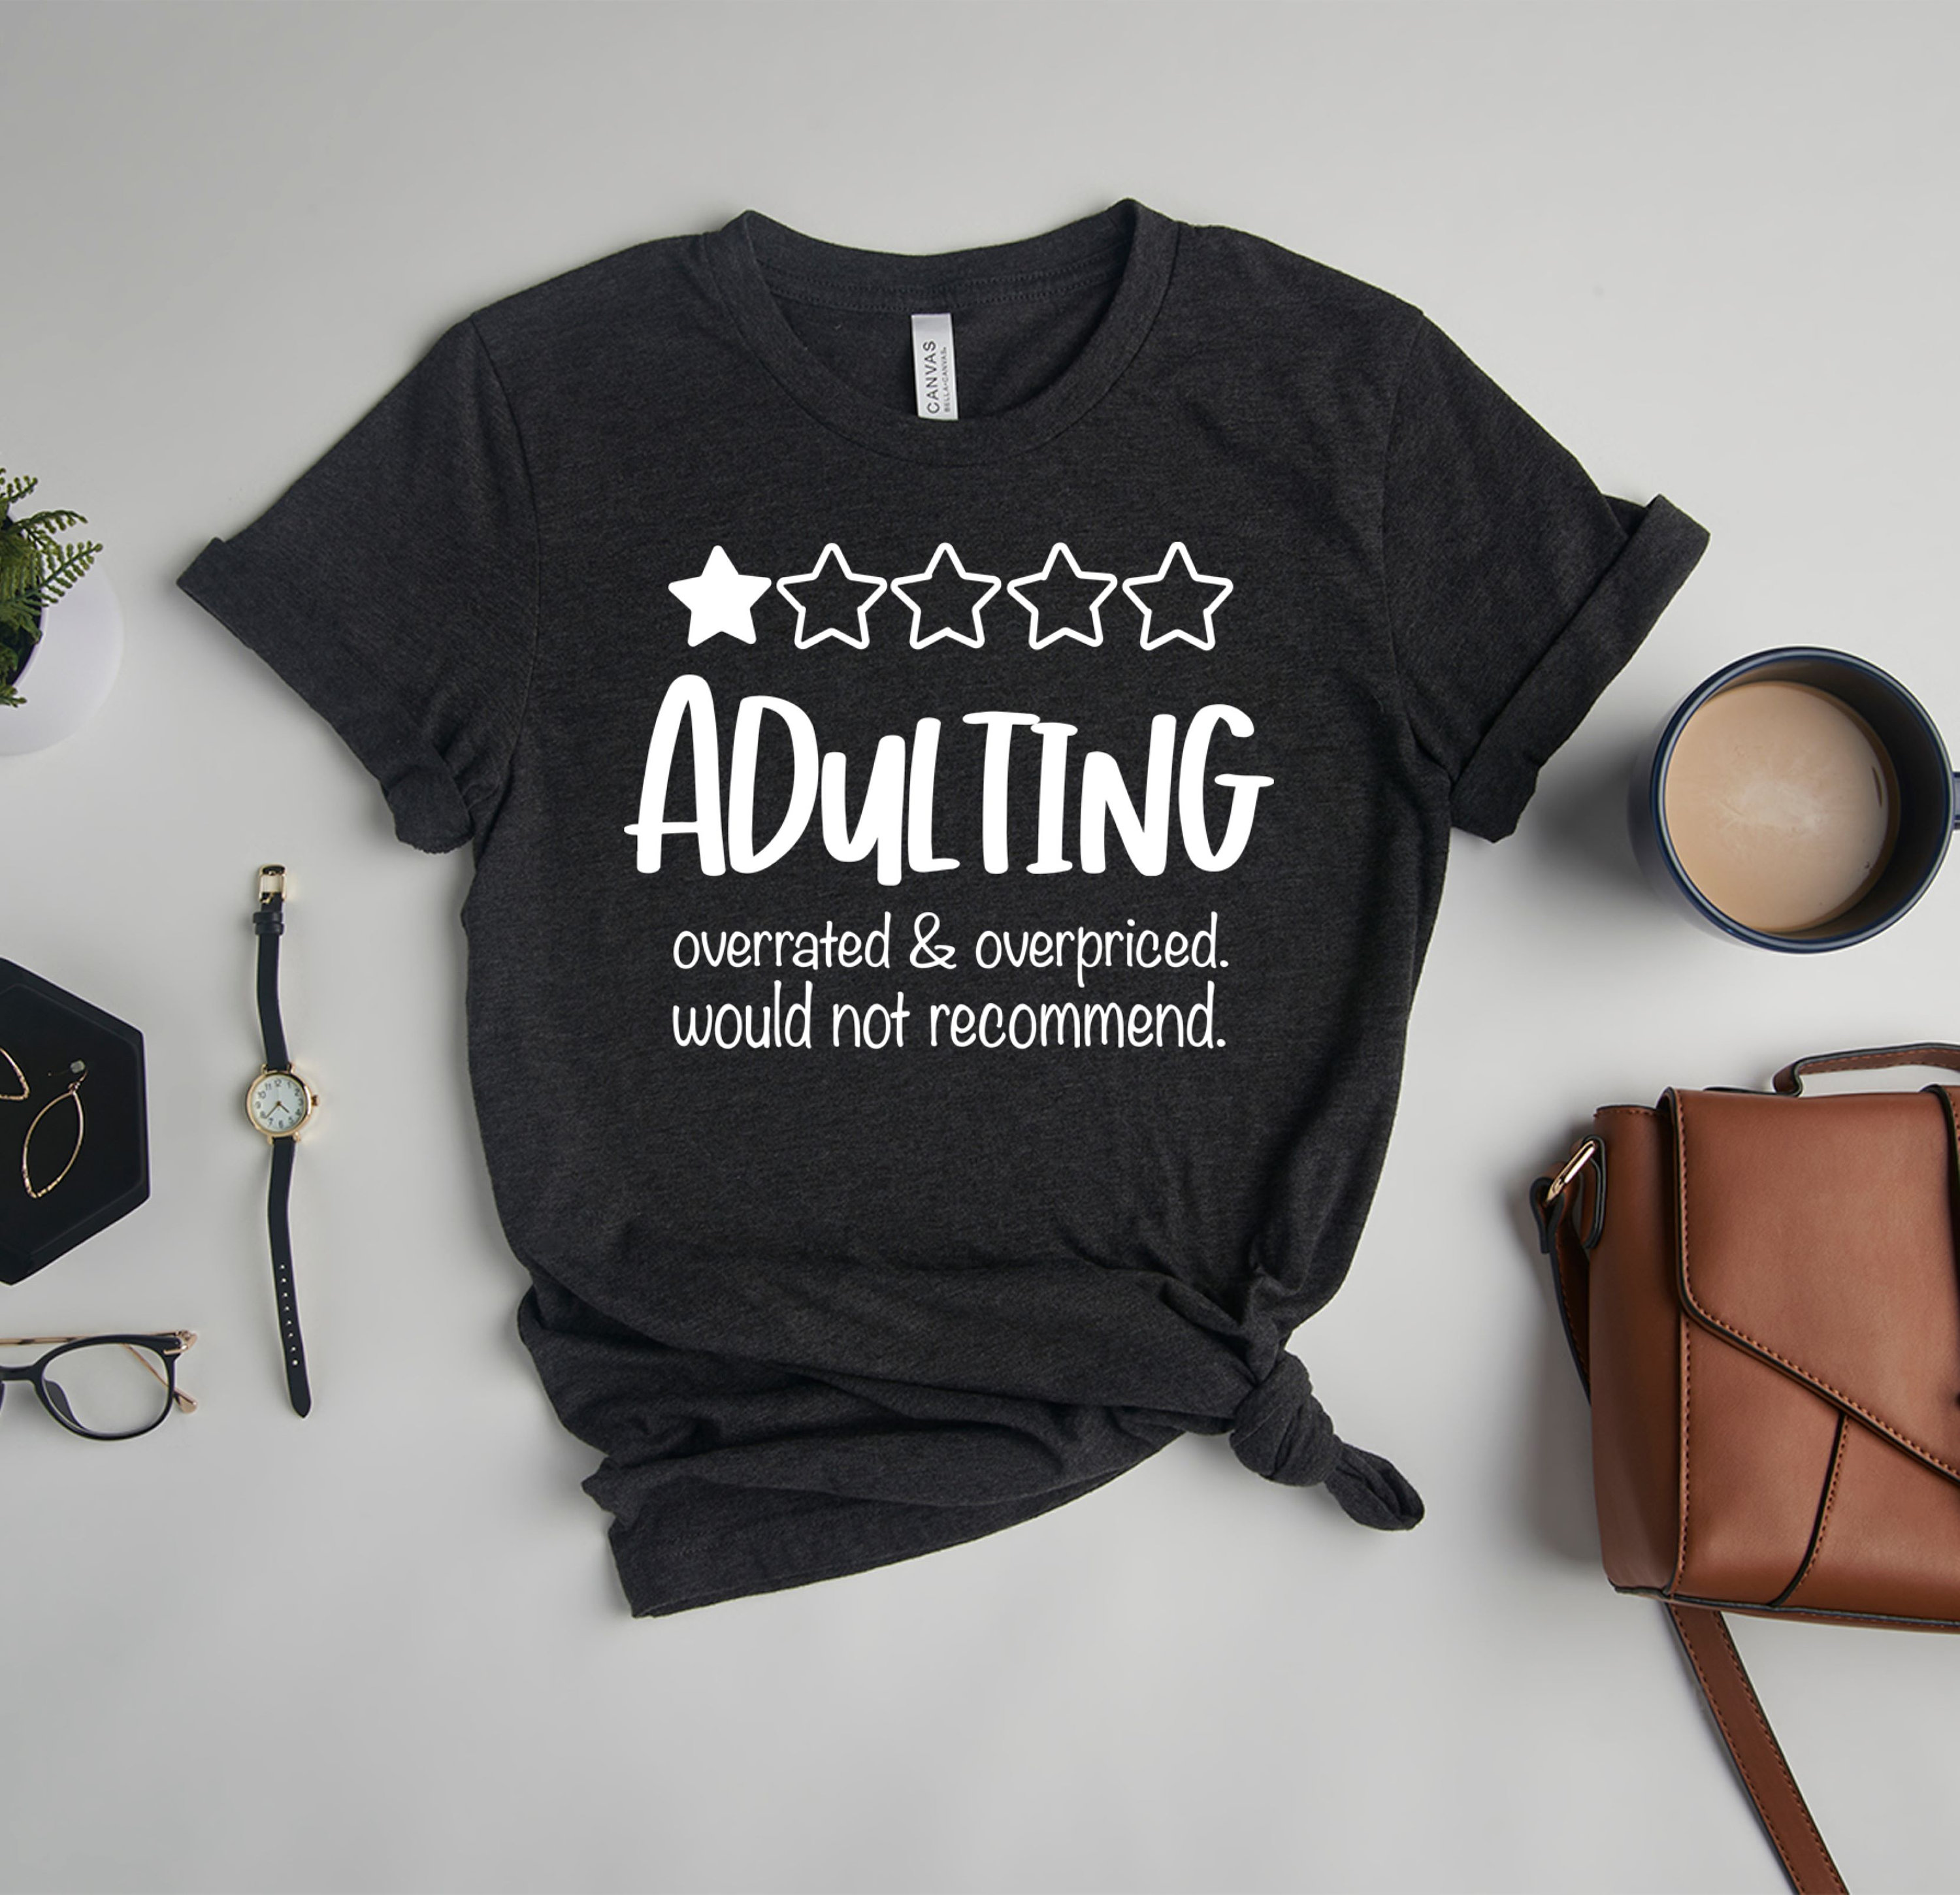 Adulting Overrated & Overpriced Shirt Would Not Recommend | Etsy